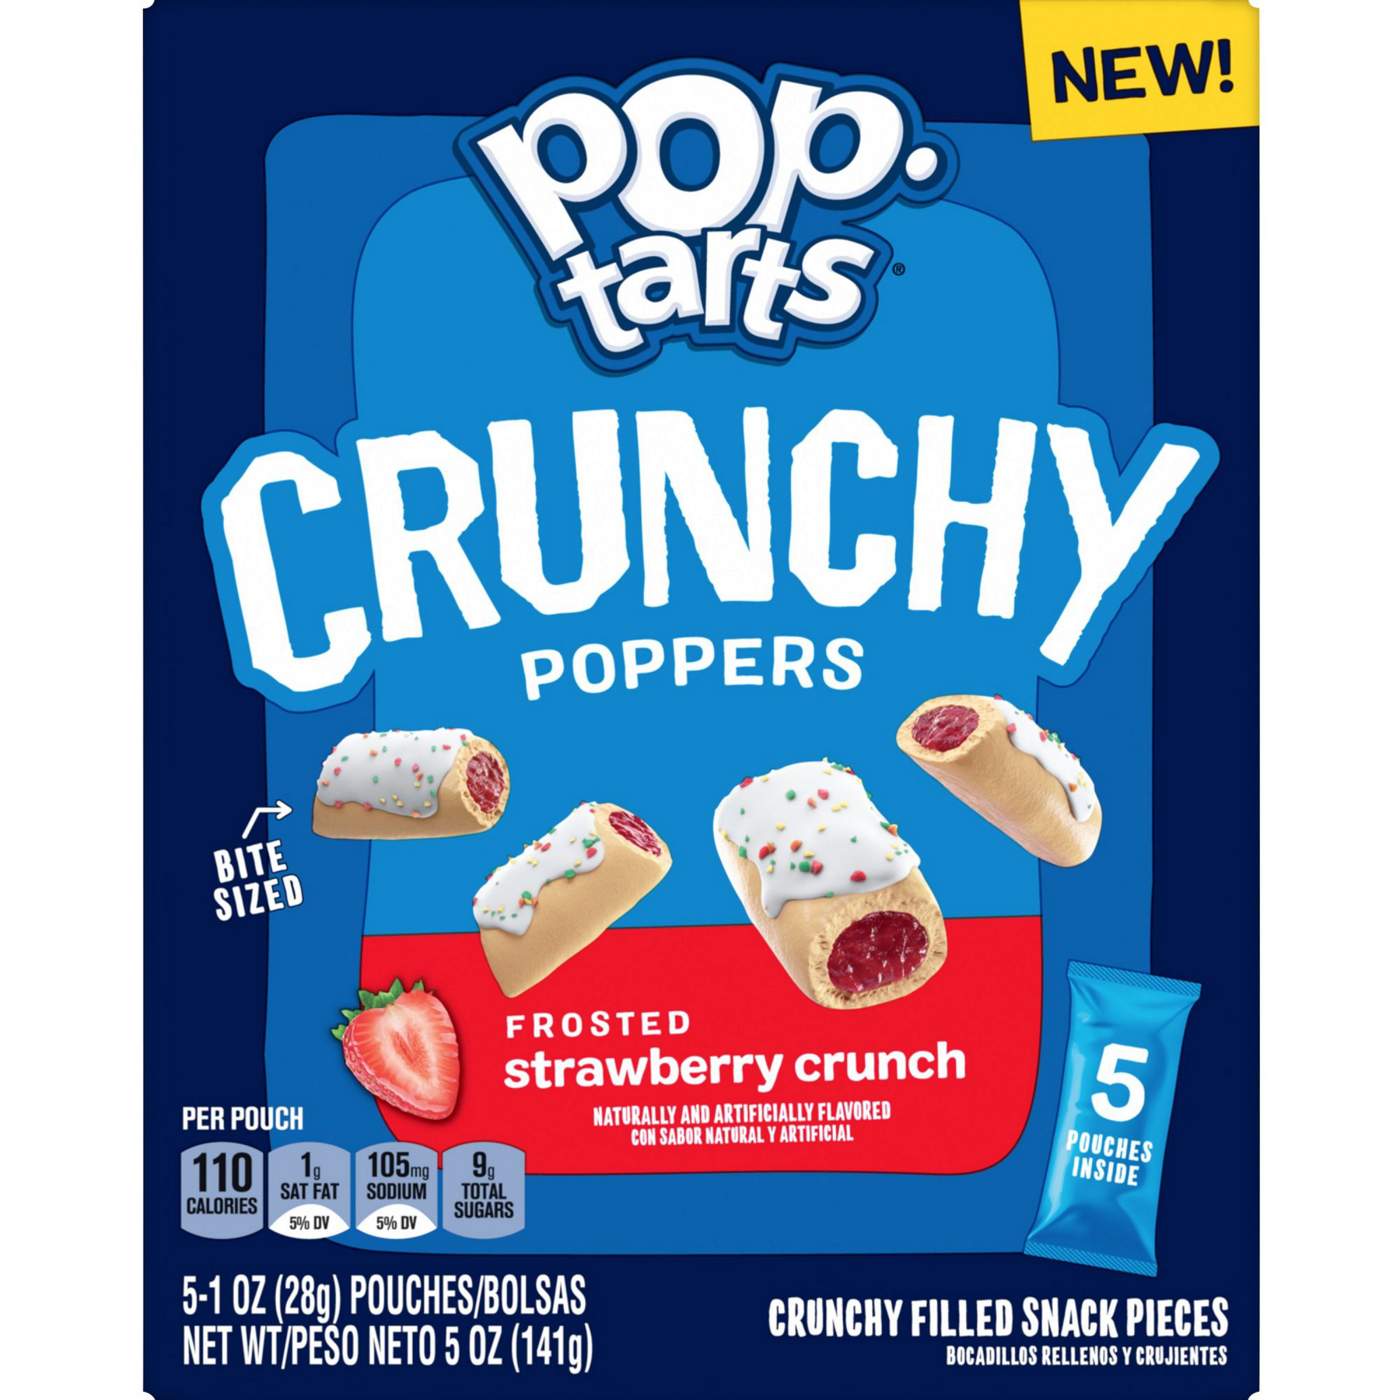 Pop-Tarts Crunchy Poppers Frosted Strawberry Crunch Crunchy Filled Snack Pieces; image 1 of 6